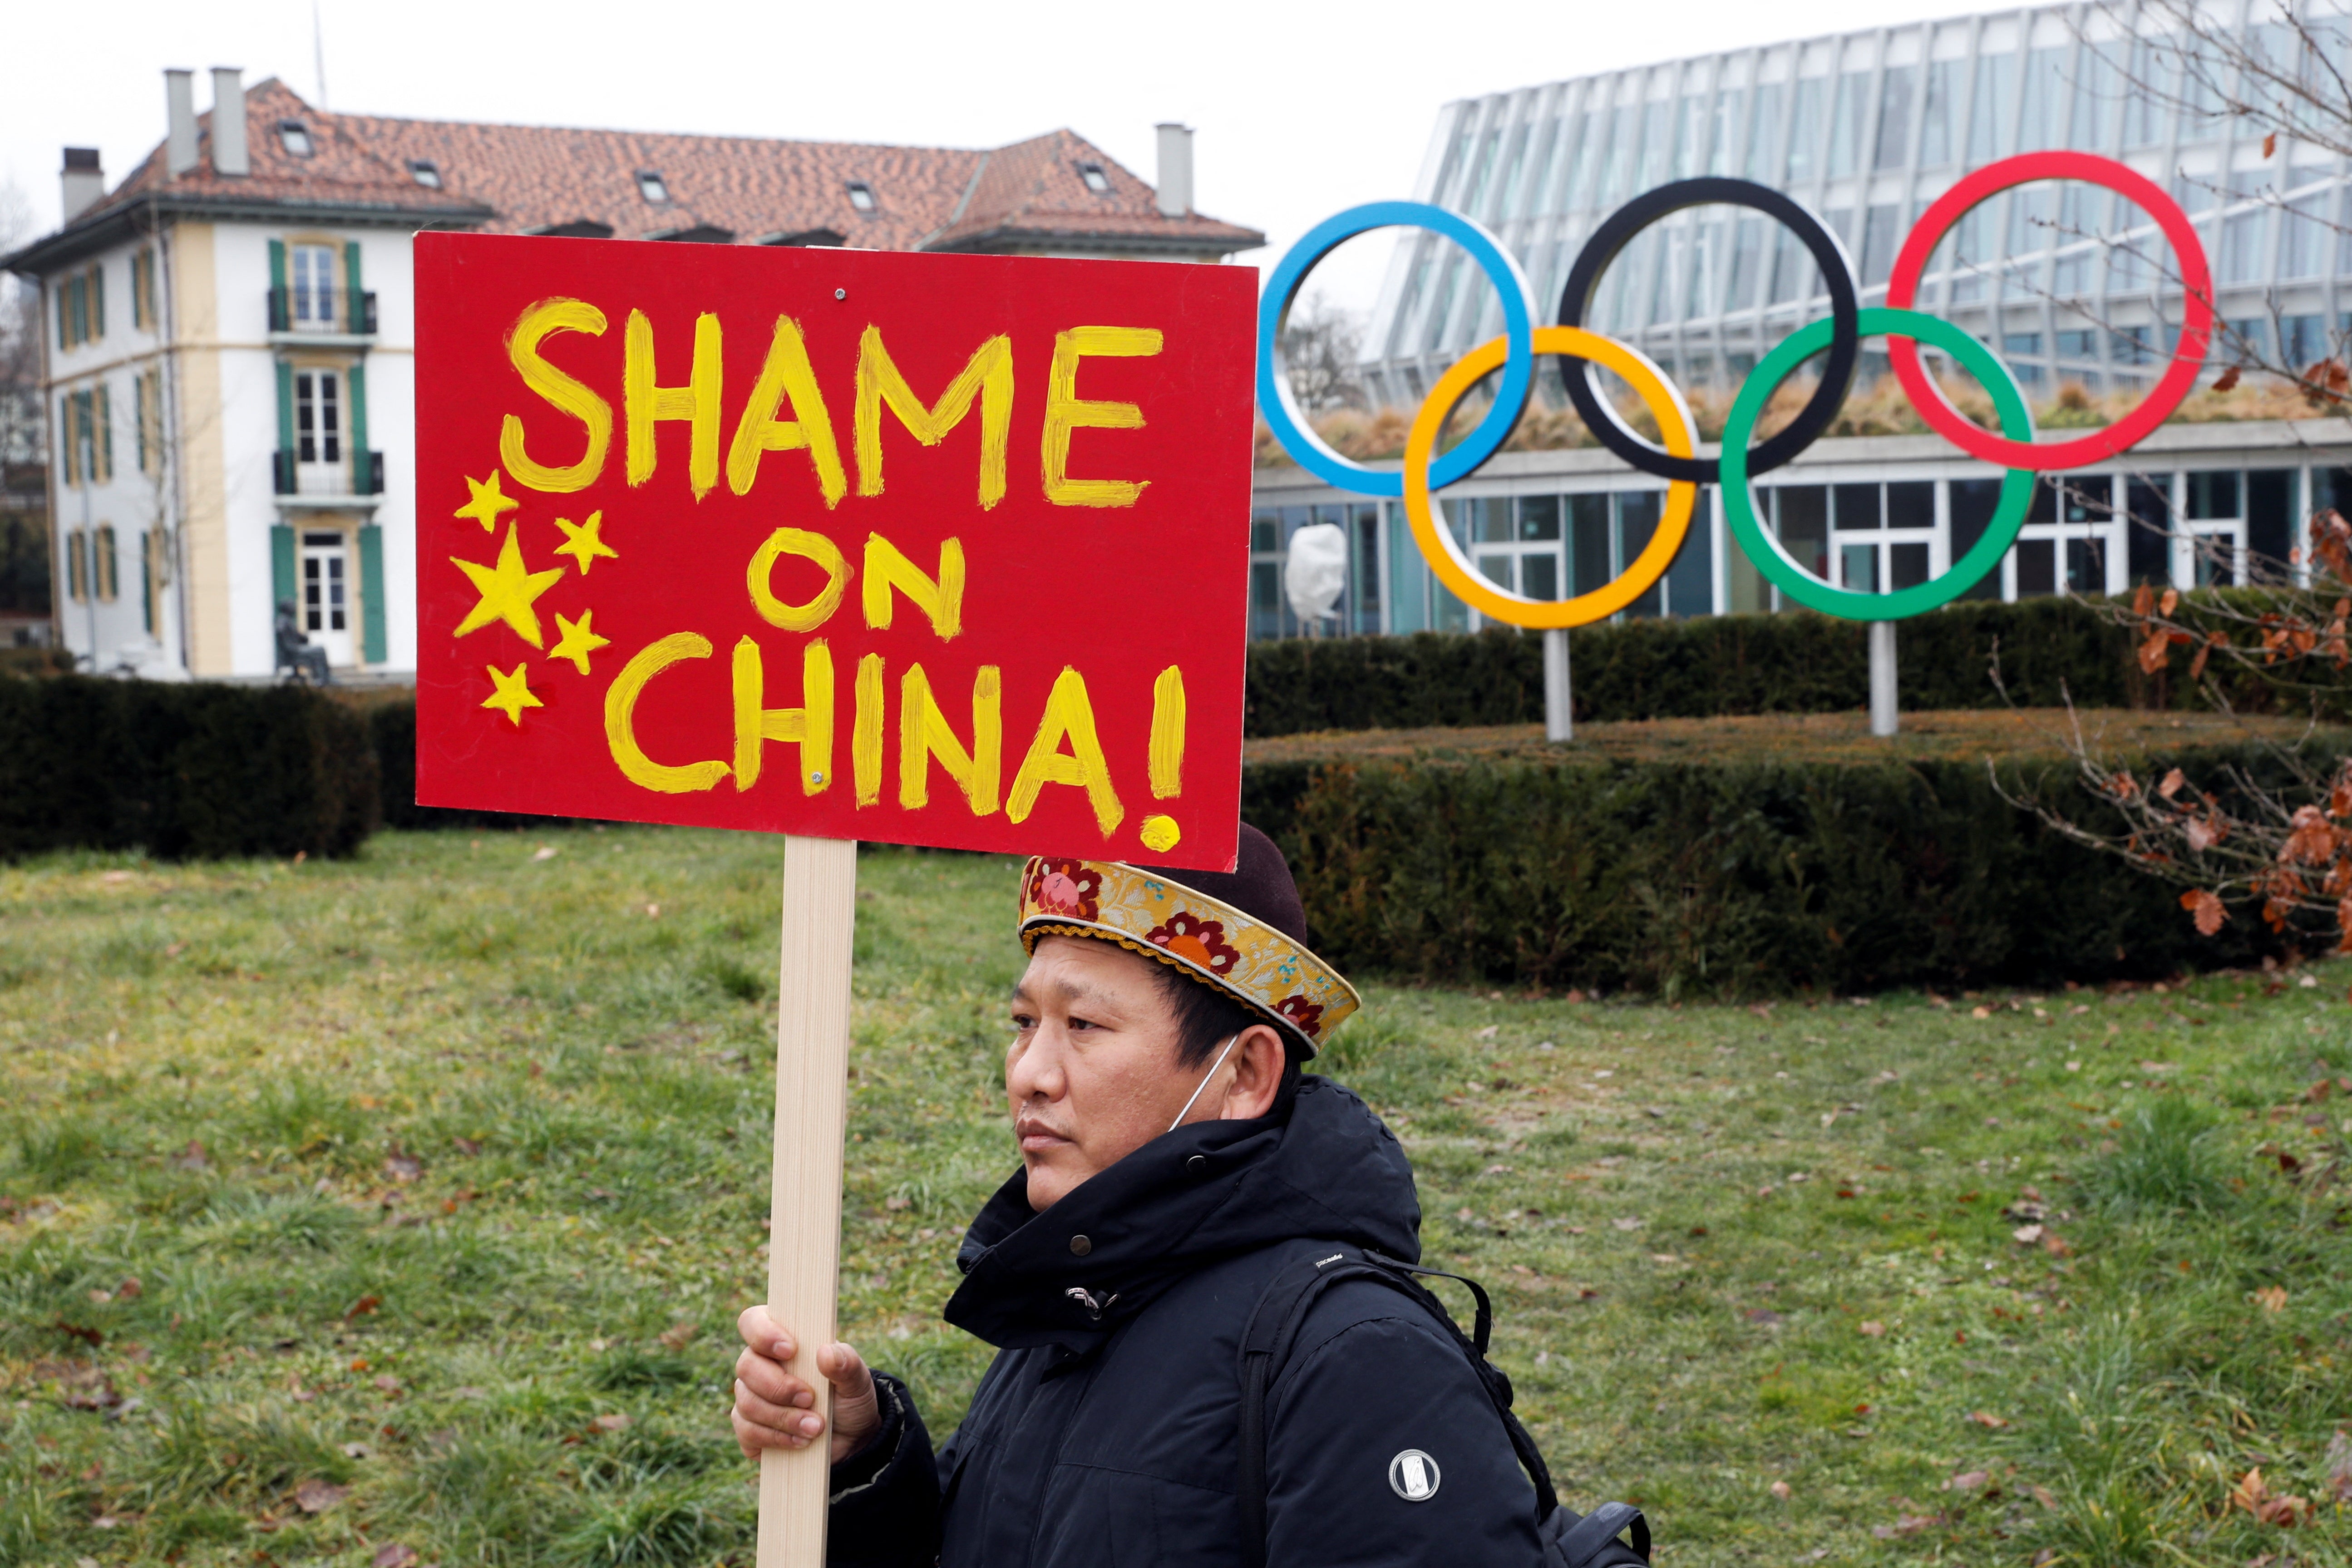 A member of Tibetan community protests in front of the headquarters of the International Olympic Committee (IOC) in Lausanne, Switzerland